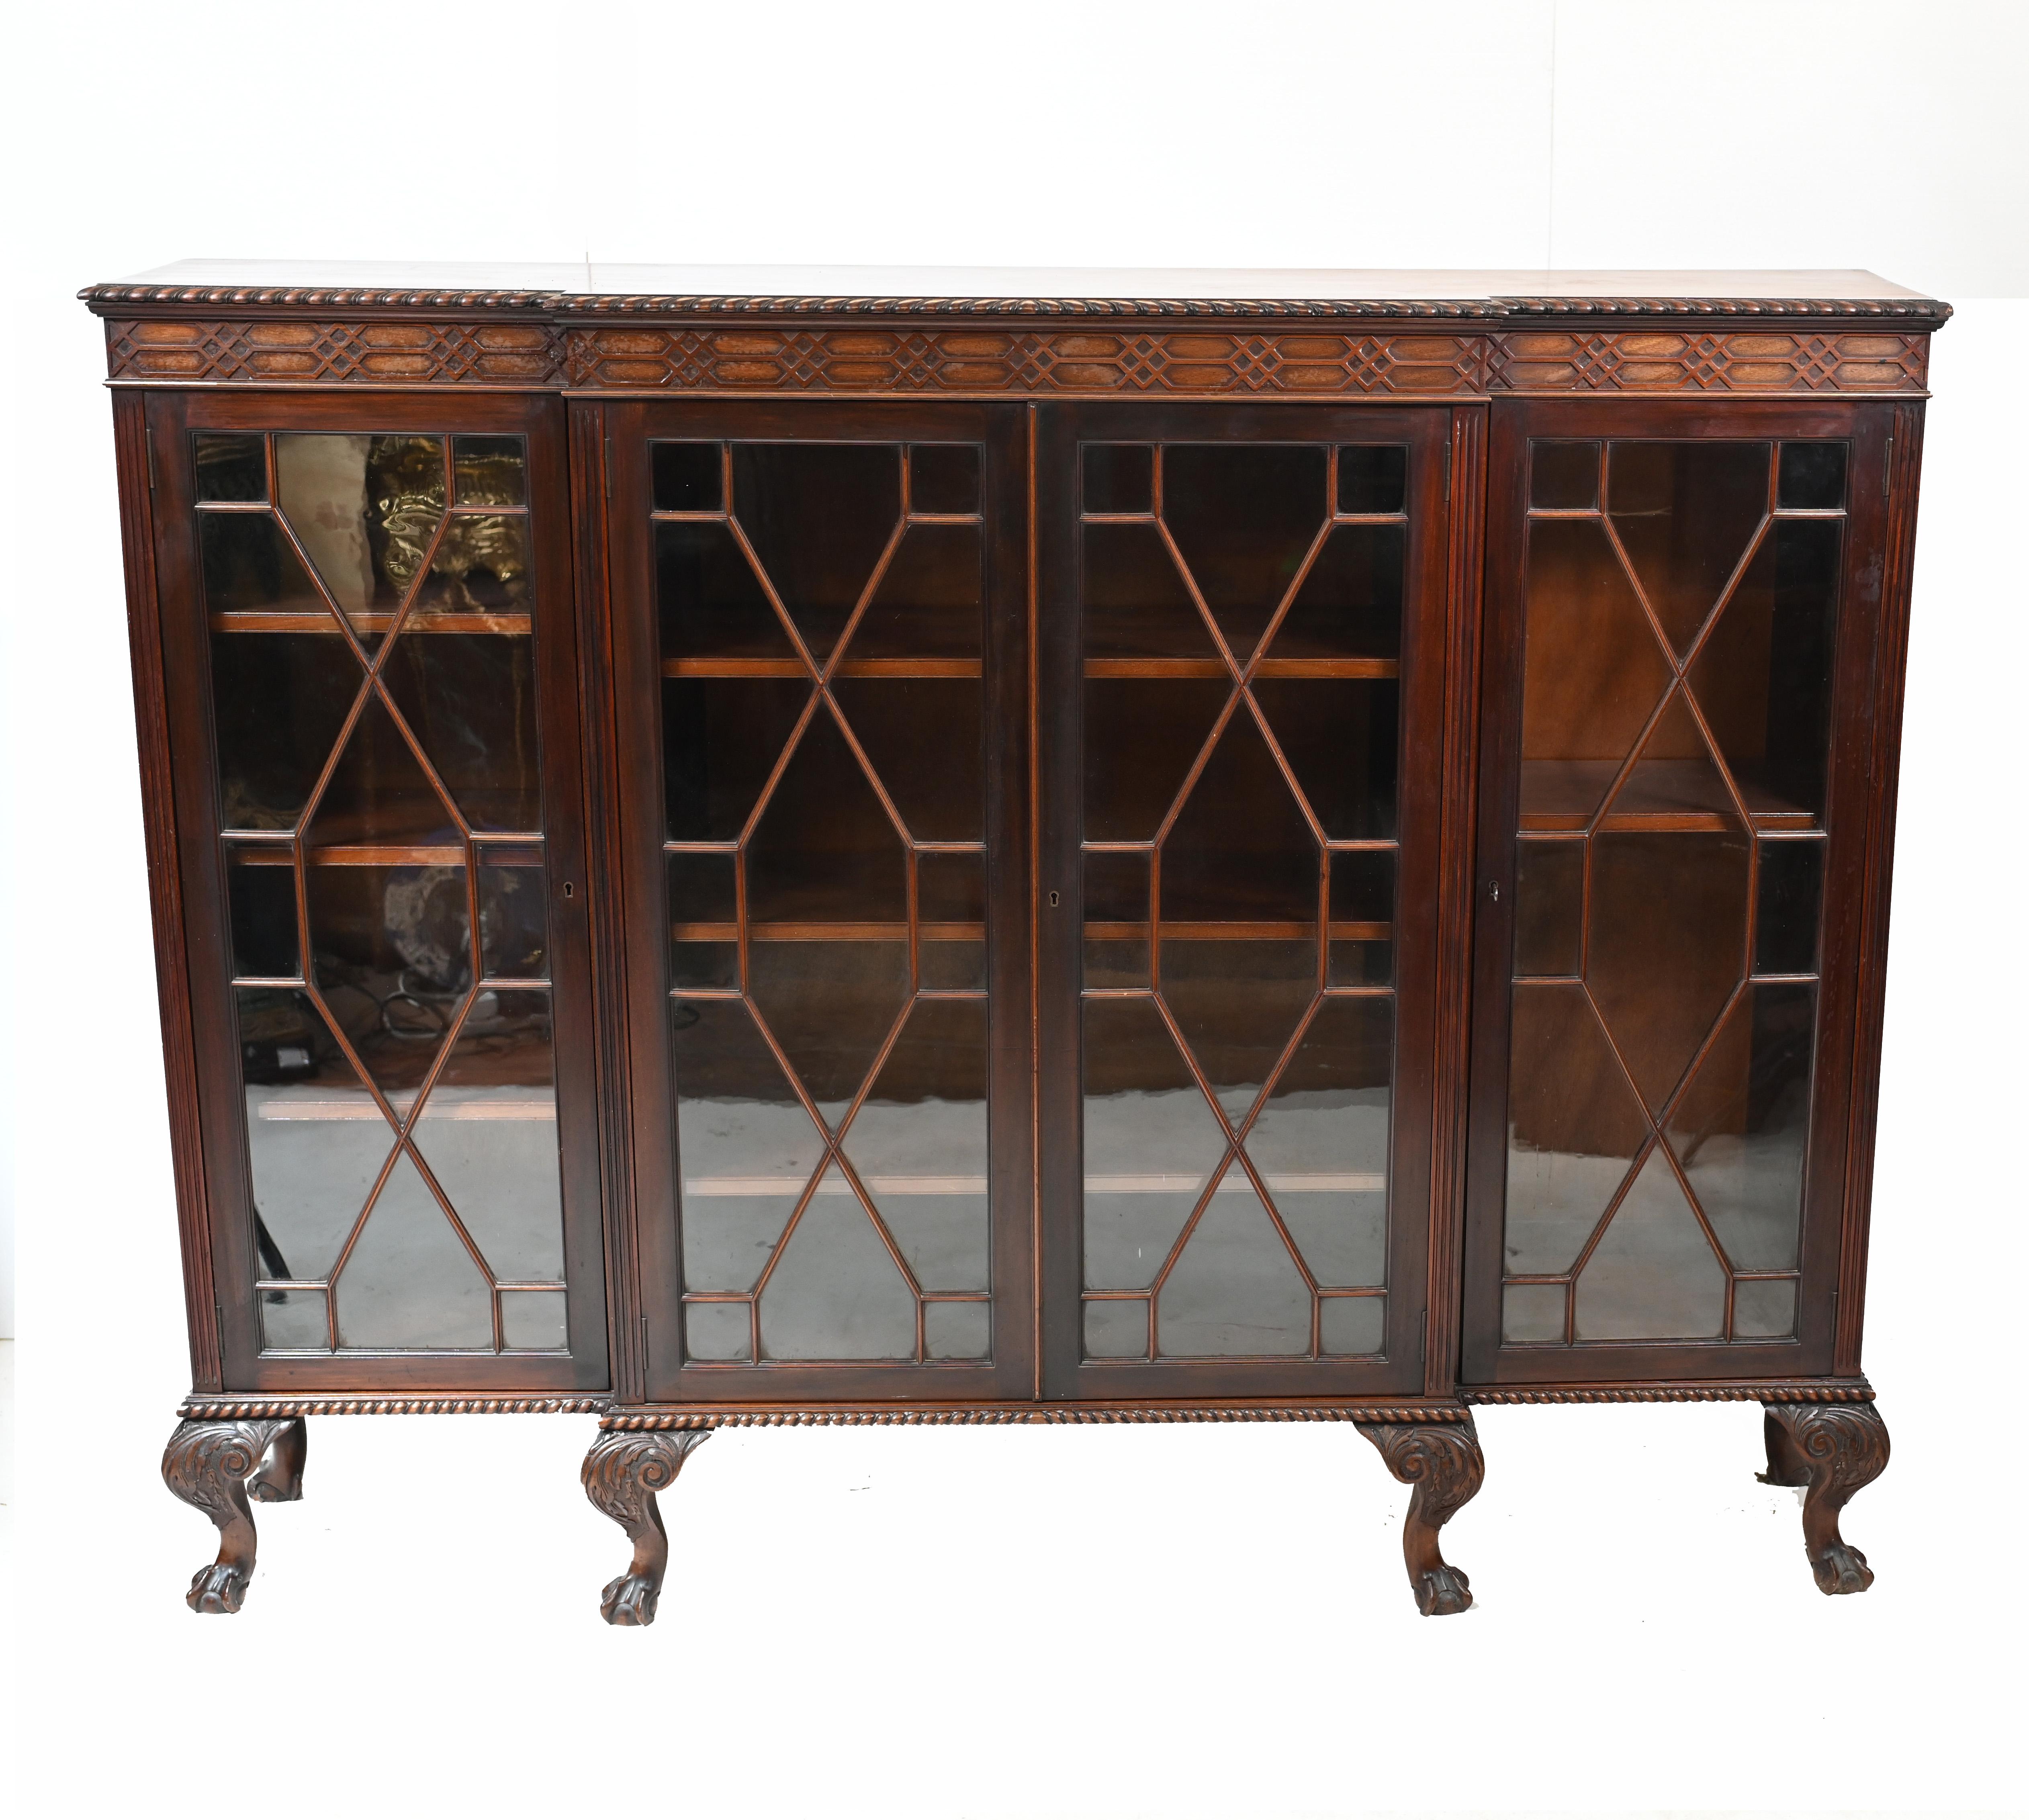 Charming mahogany breakfront cabinet in the Chippendale manner
Glass fronted so great for displaying books and decorative pieces
We date this piece to circa 1920 
Glazed doors open out to reveal shelved interior
Elegant piece of classic English